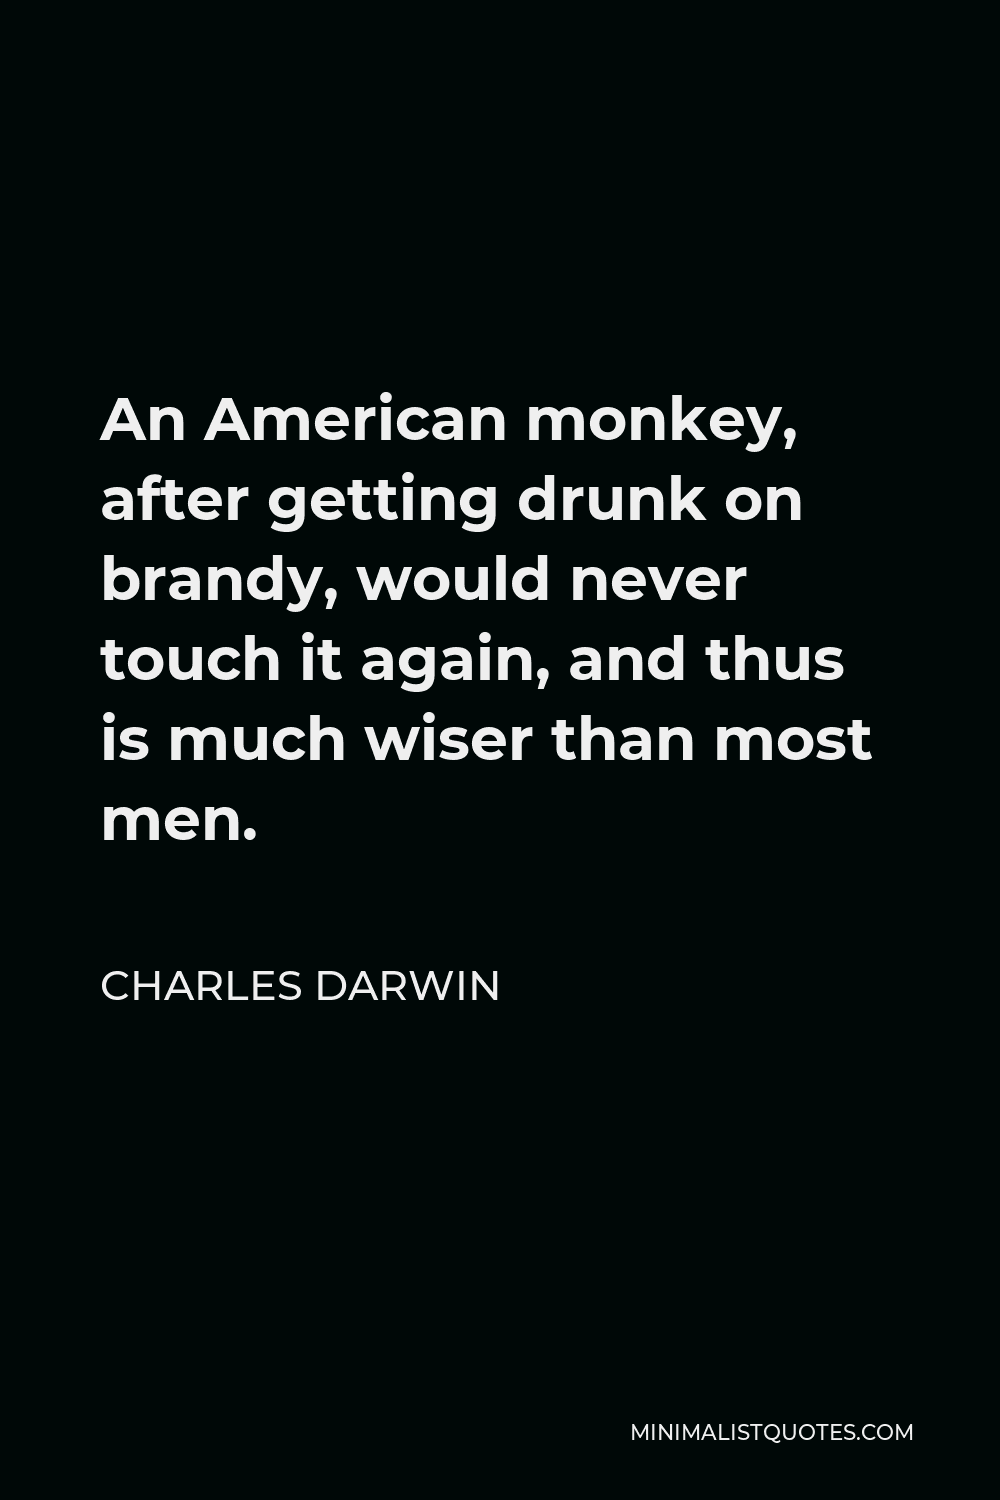 Charles Darwin Quote - An American monkey, after getting drunk on brandy, would never touch it again, and thus is much wiser than most men.